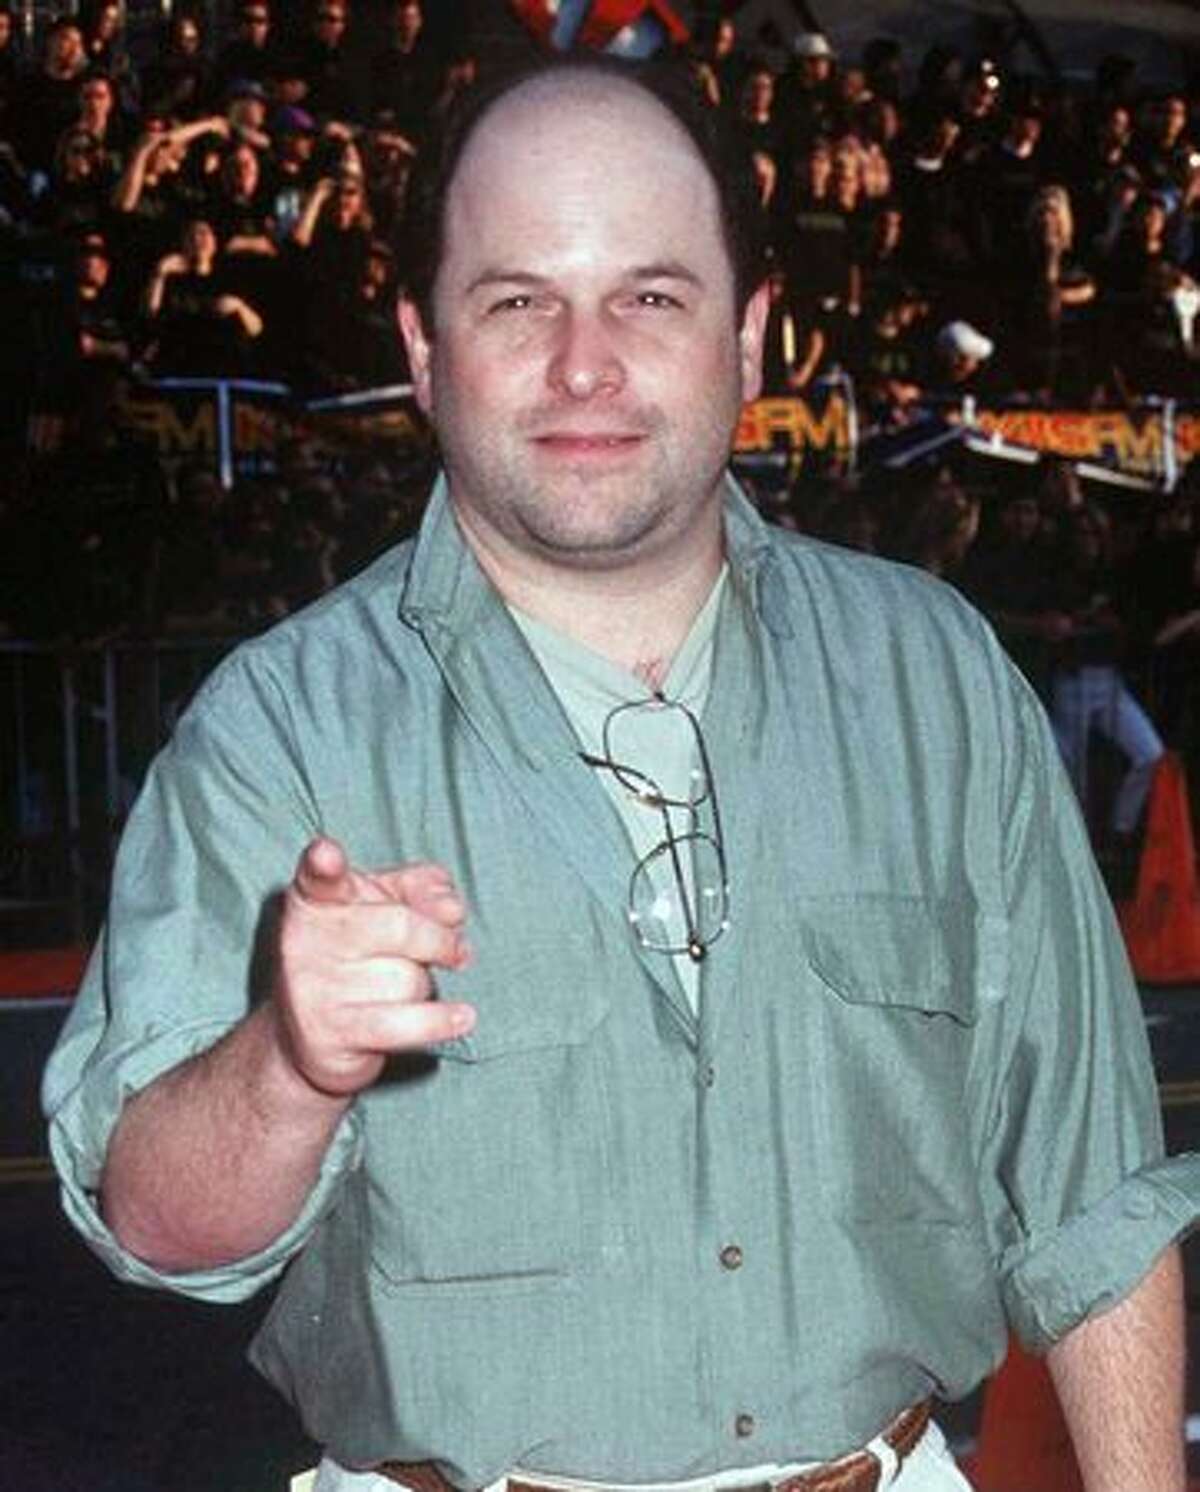 We begin our second installment of actors through the years with "Seinfeld" and rom-com veteran Jason Alexander, seen here on June 11, 1996 at age 36.